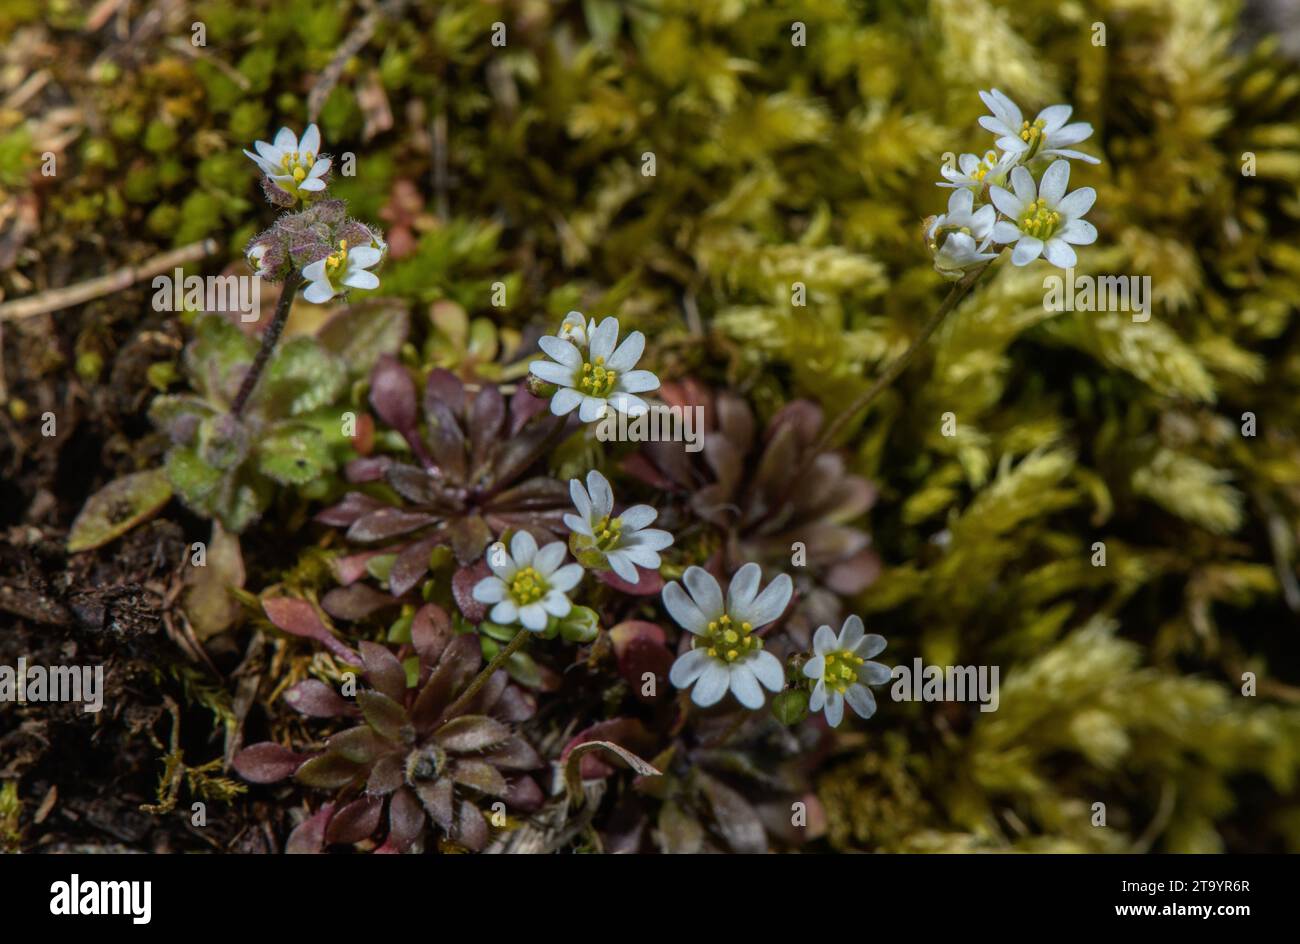 Common whitlowgrass, Draba verna, in flower in early spring. Stock Photo